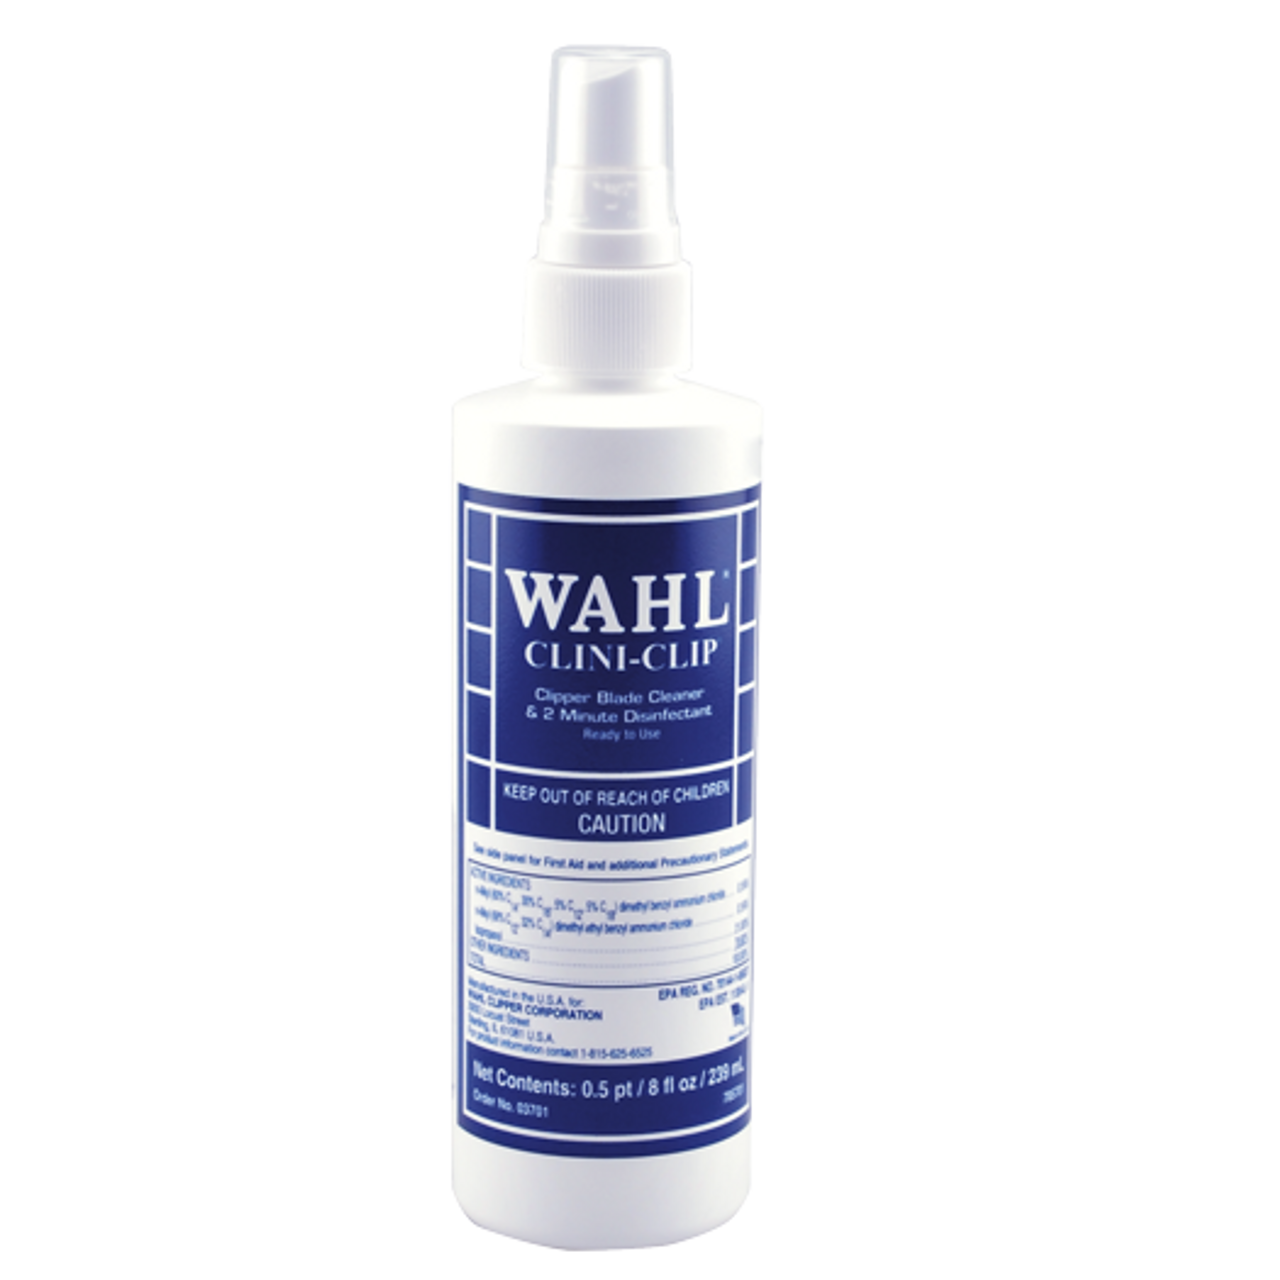 Wahl Professional Clini-Clip Blade Disinfectant and Cleaner - 8oz.